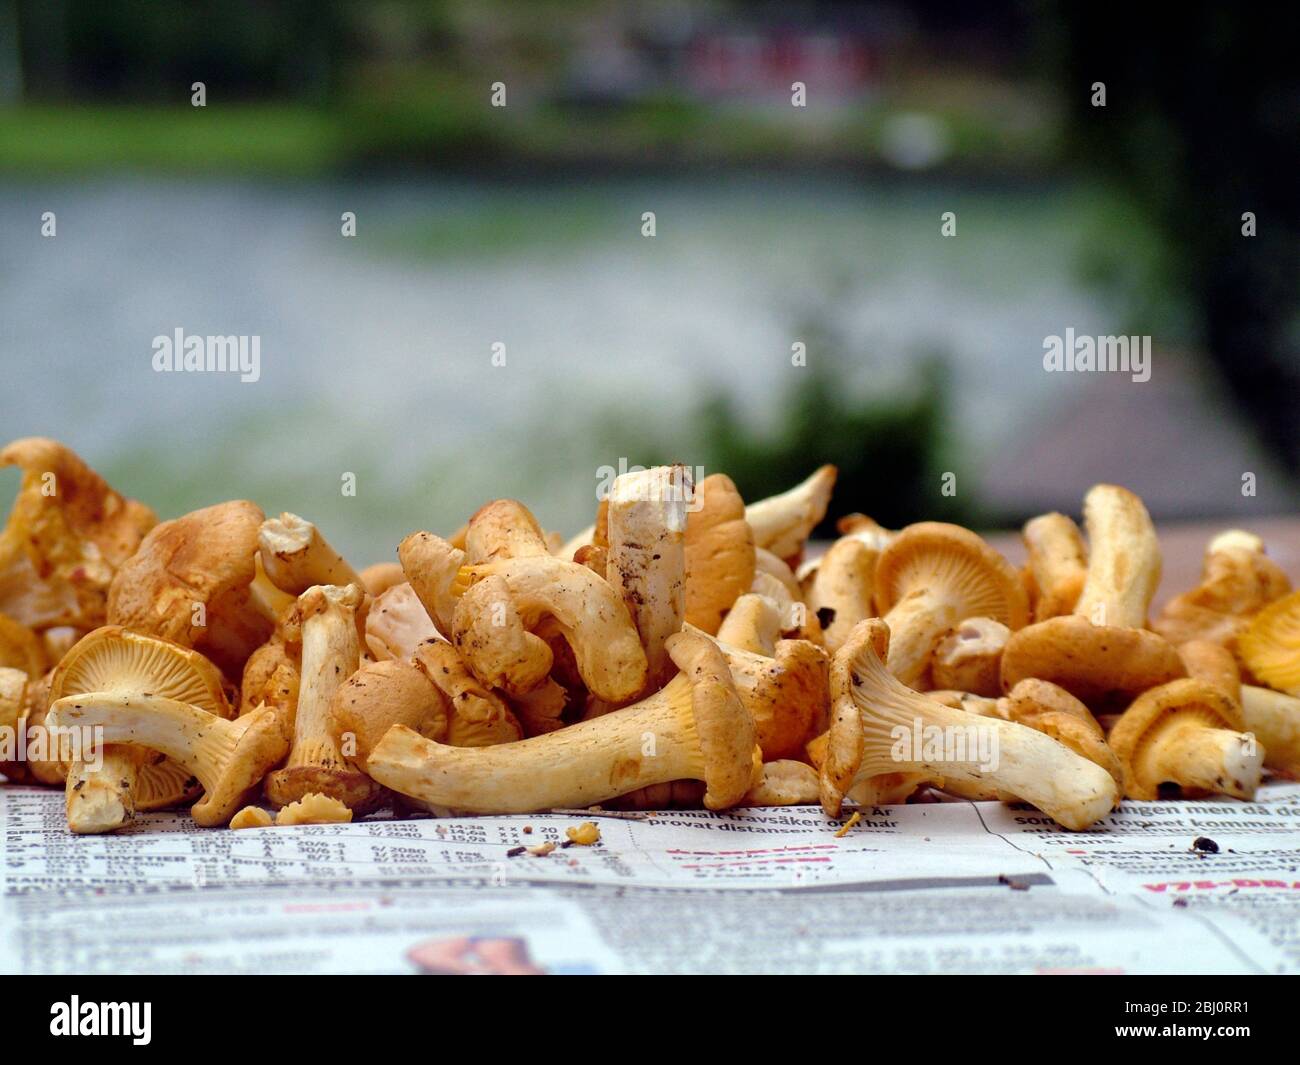 The Yellow or Golden Chanterelle (Cantharellus cibarius) freshly picked and being cleaned on newspaper on outdoor table by lake. Southern Sweden - Stock Photo